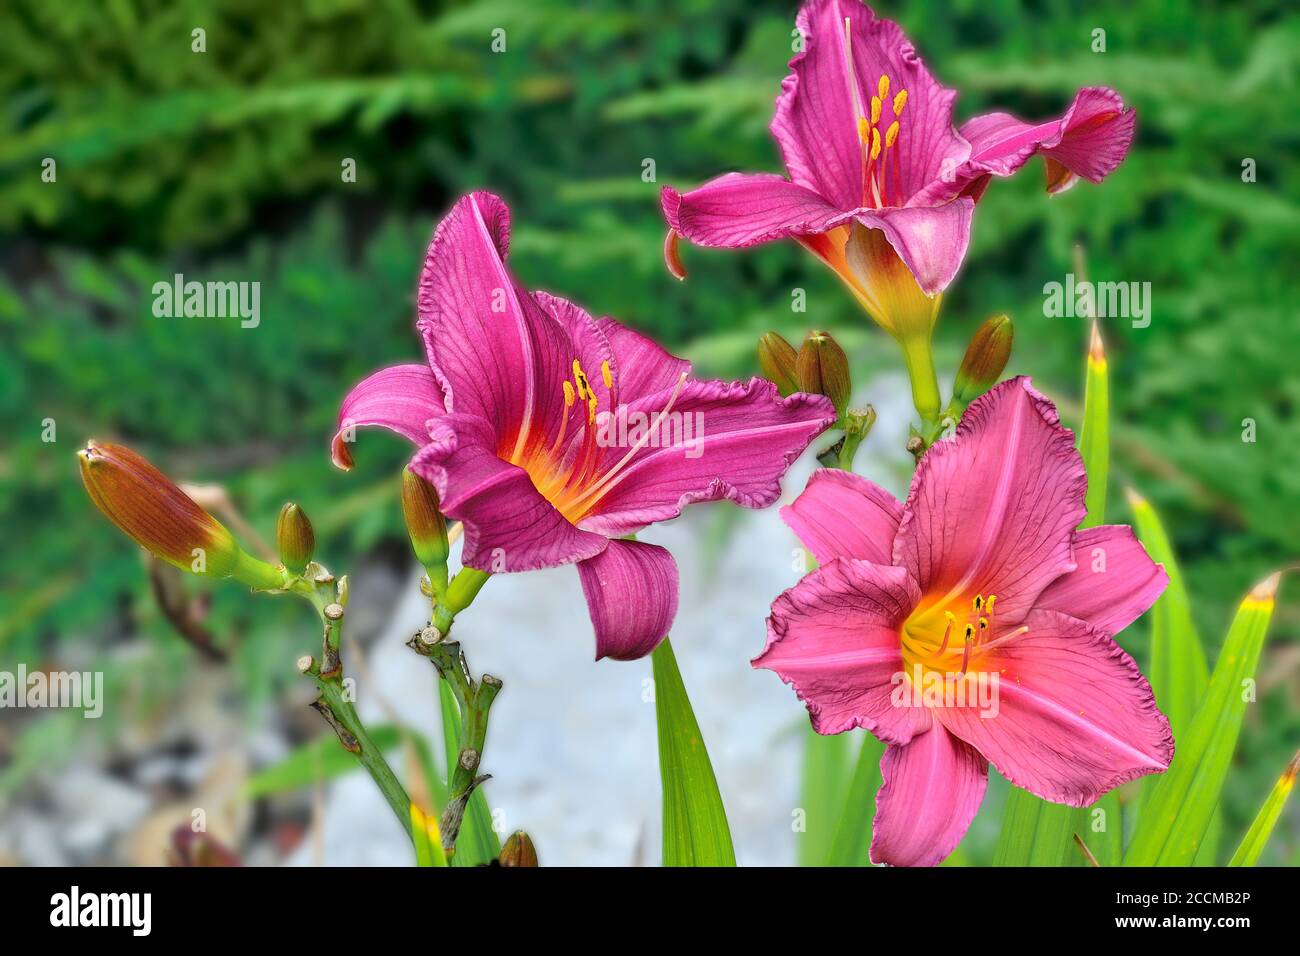 Beautiful three pink Day Lily or Hemerocallis flowers close up in summer garden on blurred background. Bright delicate day lilies. Gardening, floricul Stock Photo